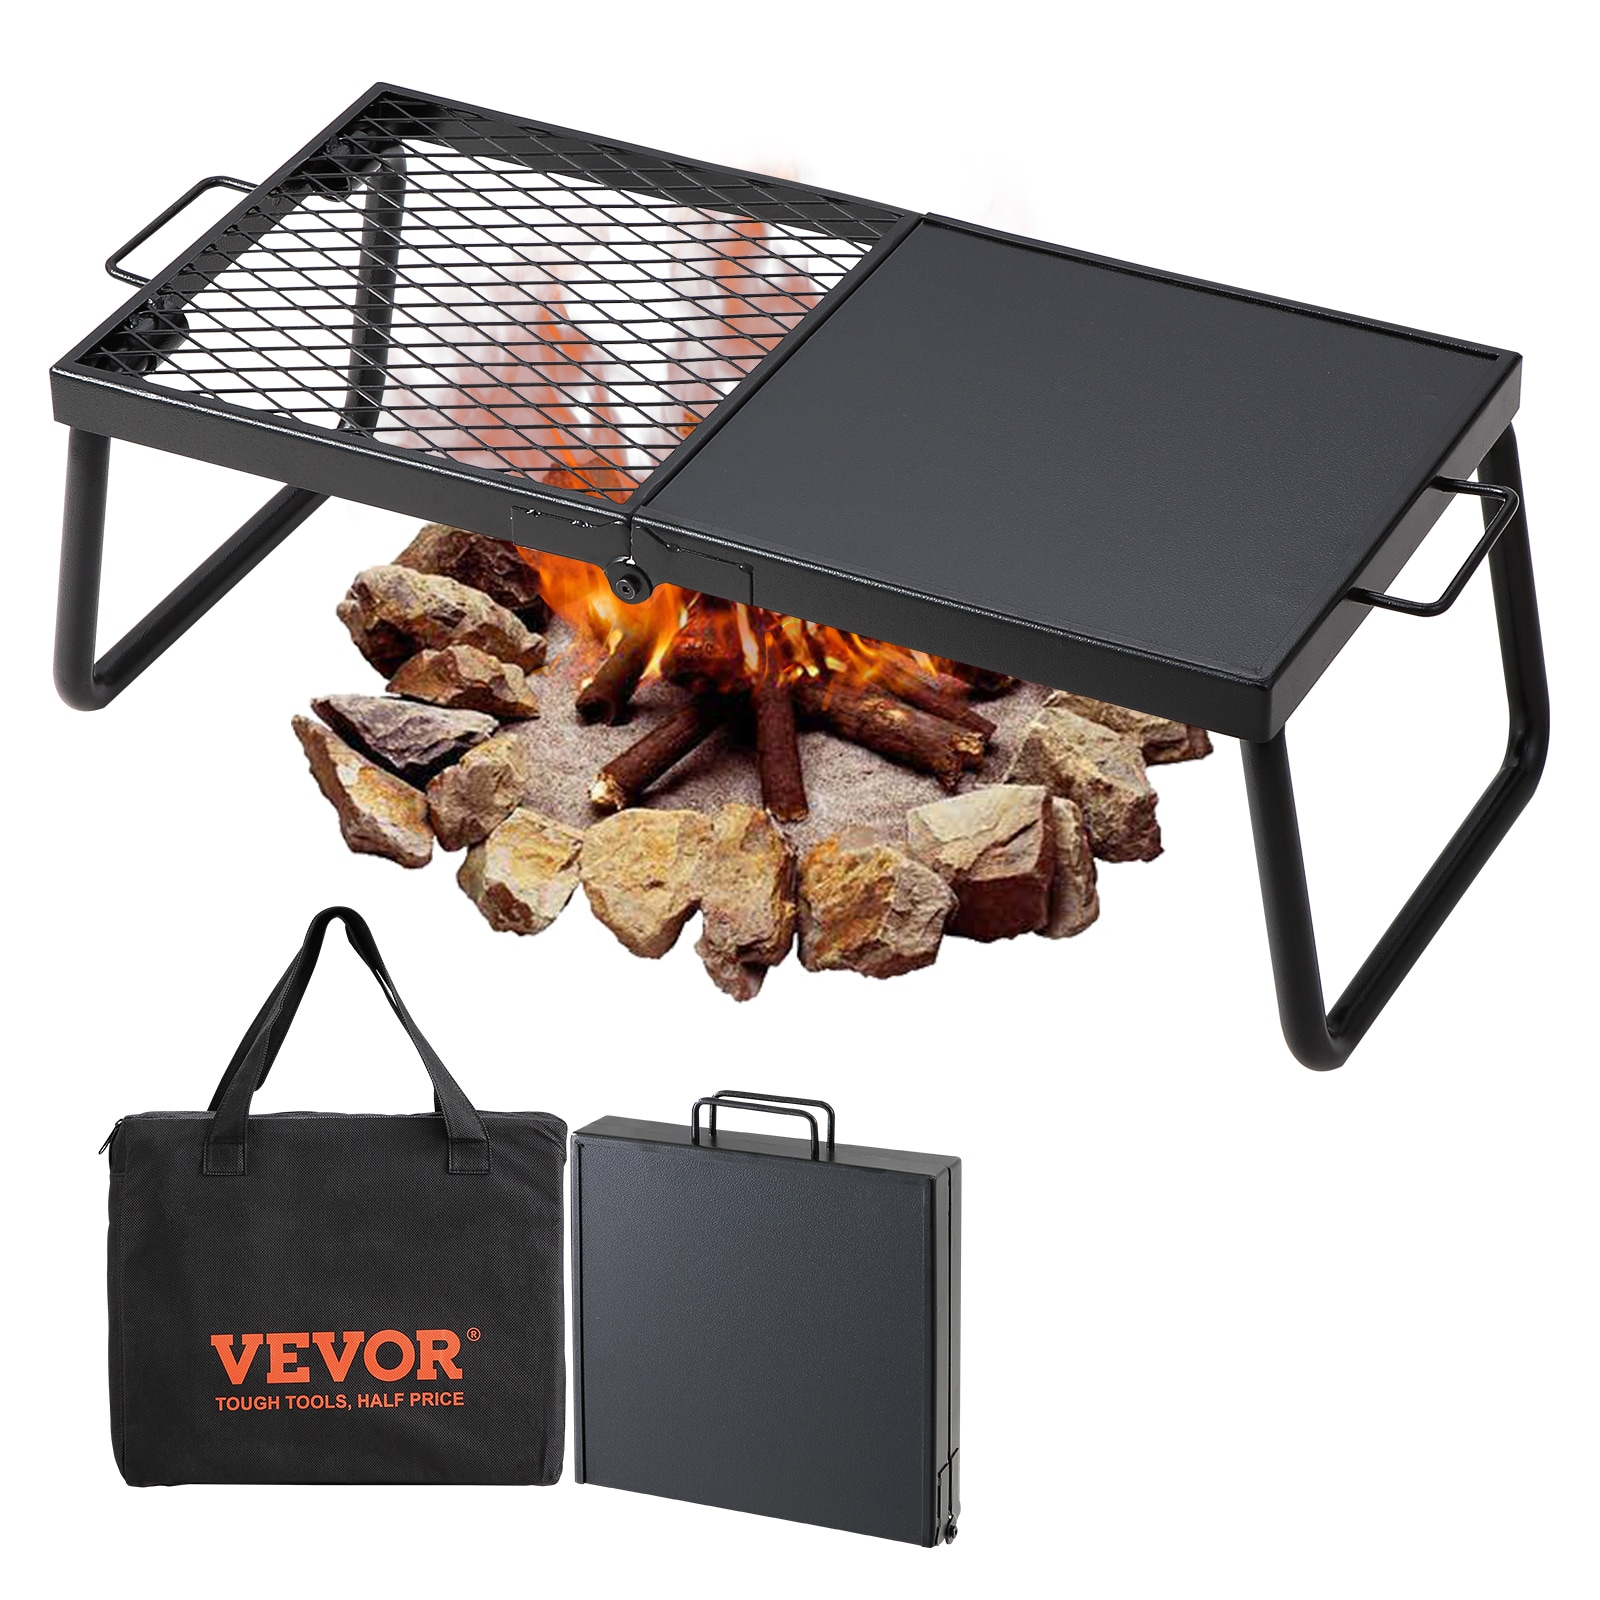 Camping Oven Stove Outdoor Folding Baking Smoked Oven Insulation Stainless  Steel Barbecue Oven Hiking Picnic BBQ